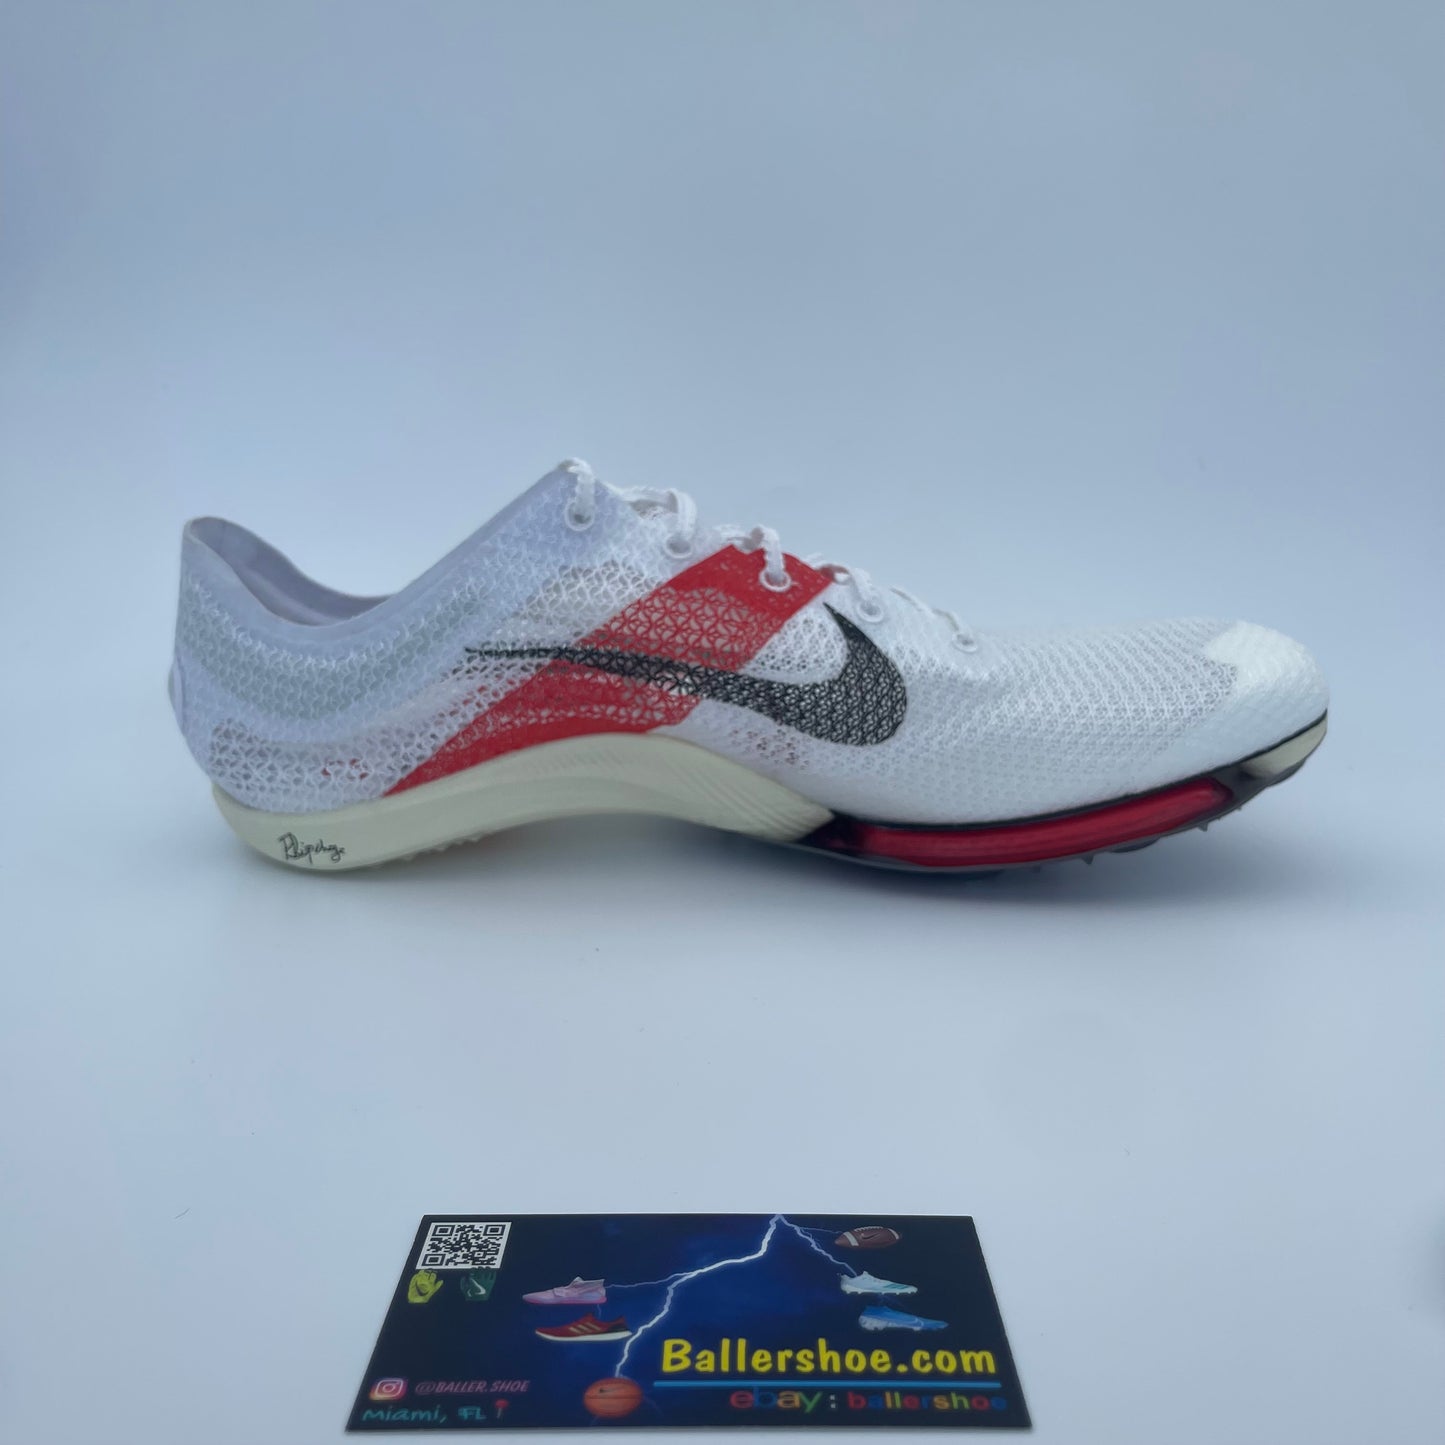 Nike Air Zoom Victory Atomknit "Eliud Kipchoge" Distance Track Spikes